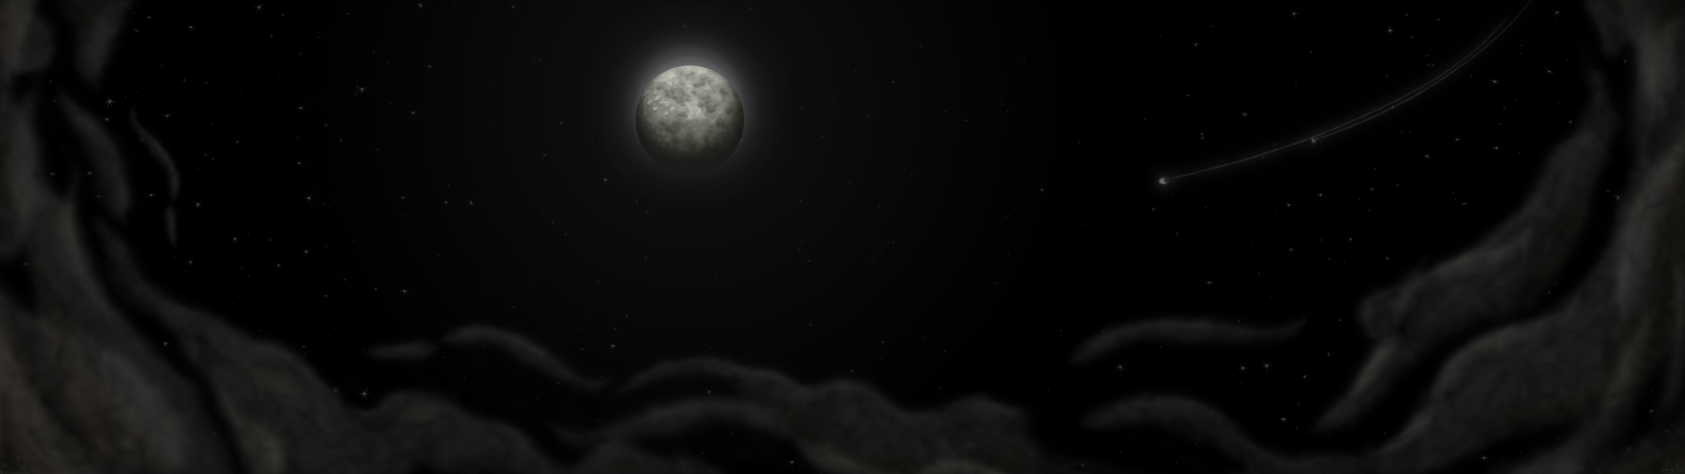 Moonlight [Dual 4K and 1080p 169 Wallpaper] by ComikzInk on 1685x474